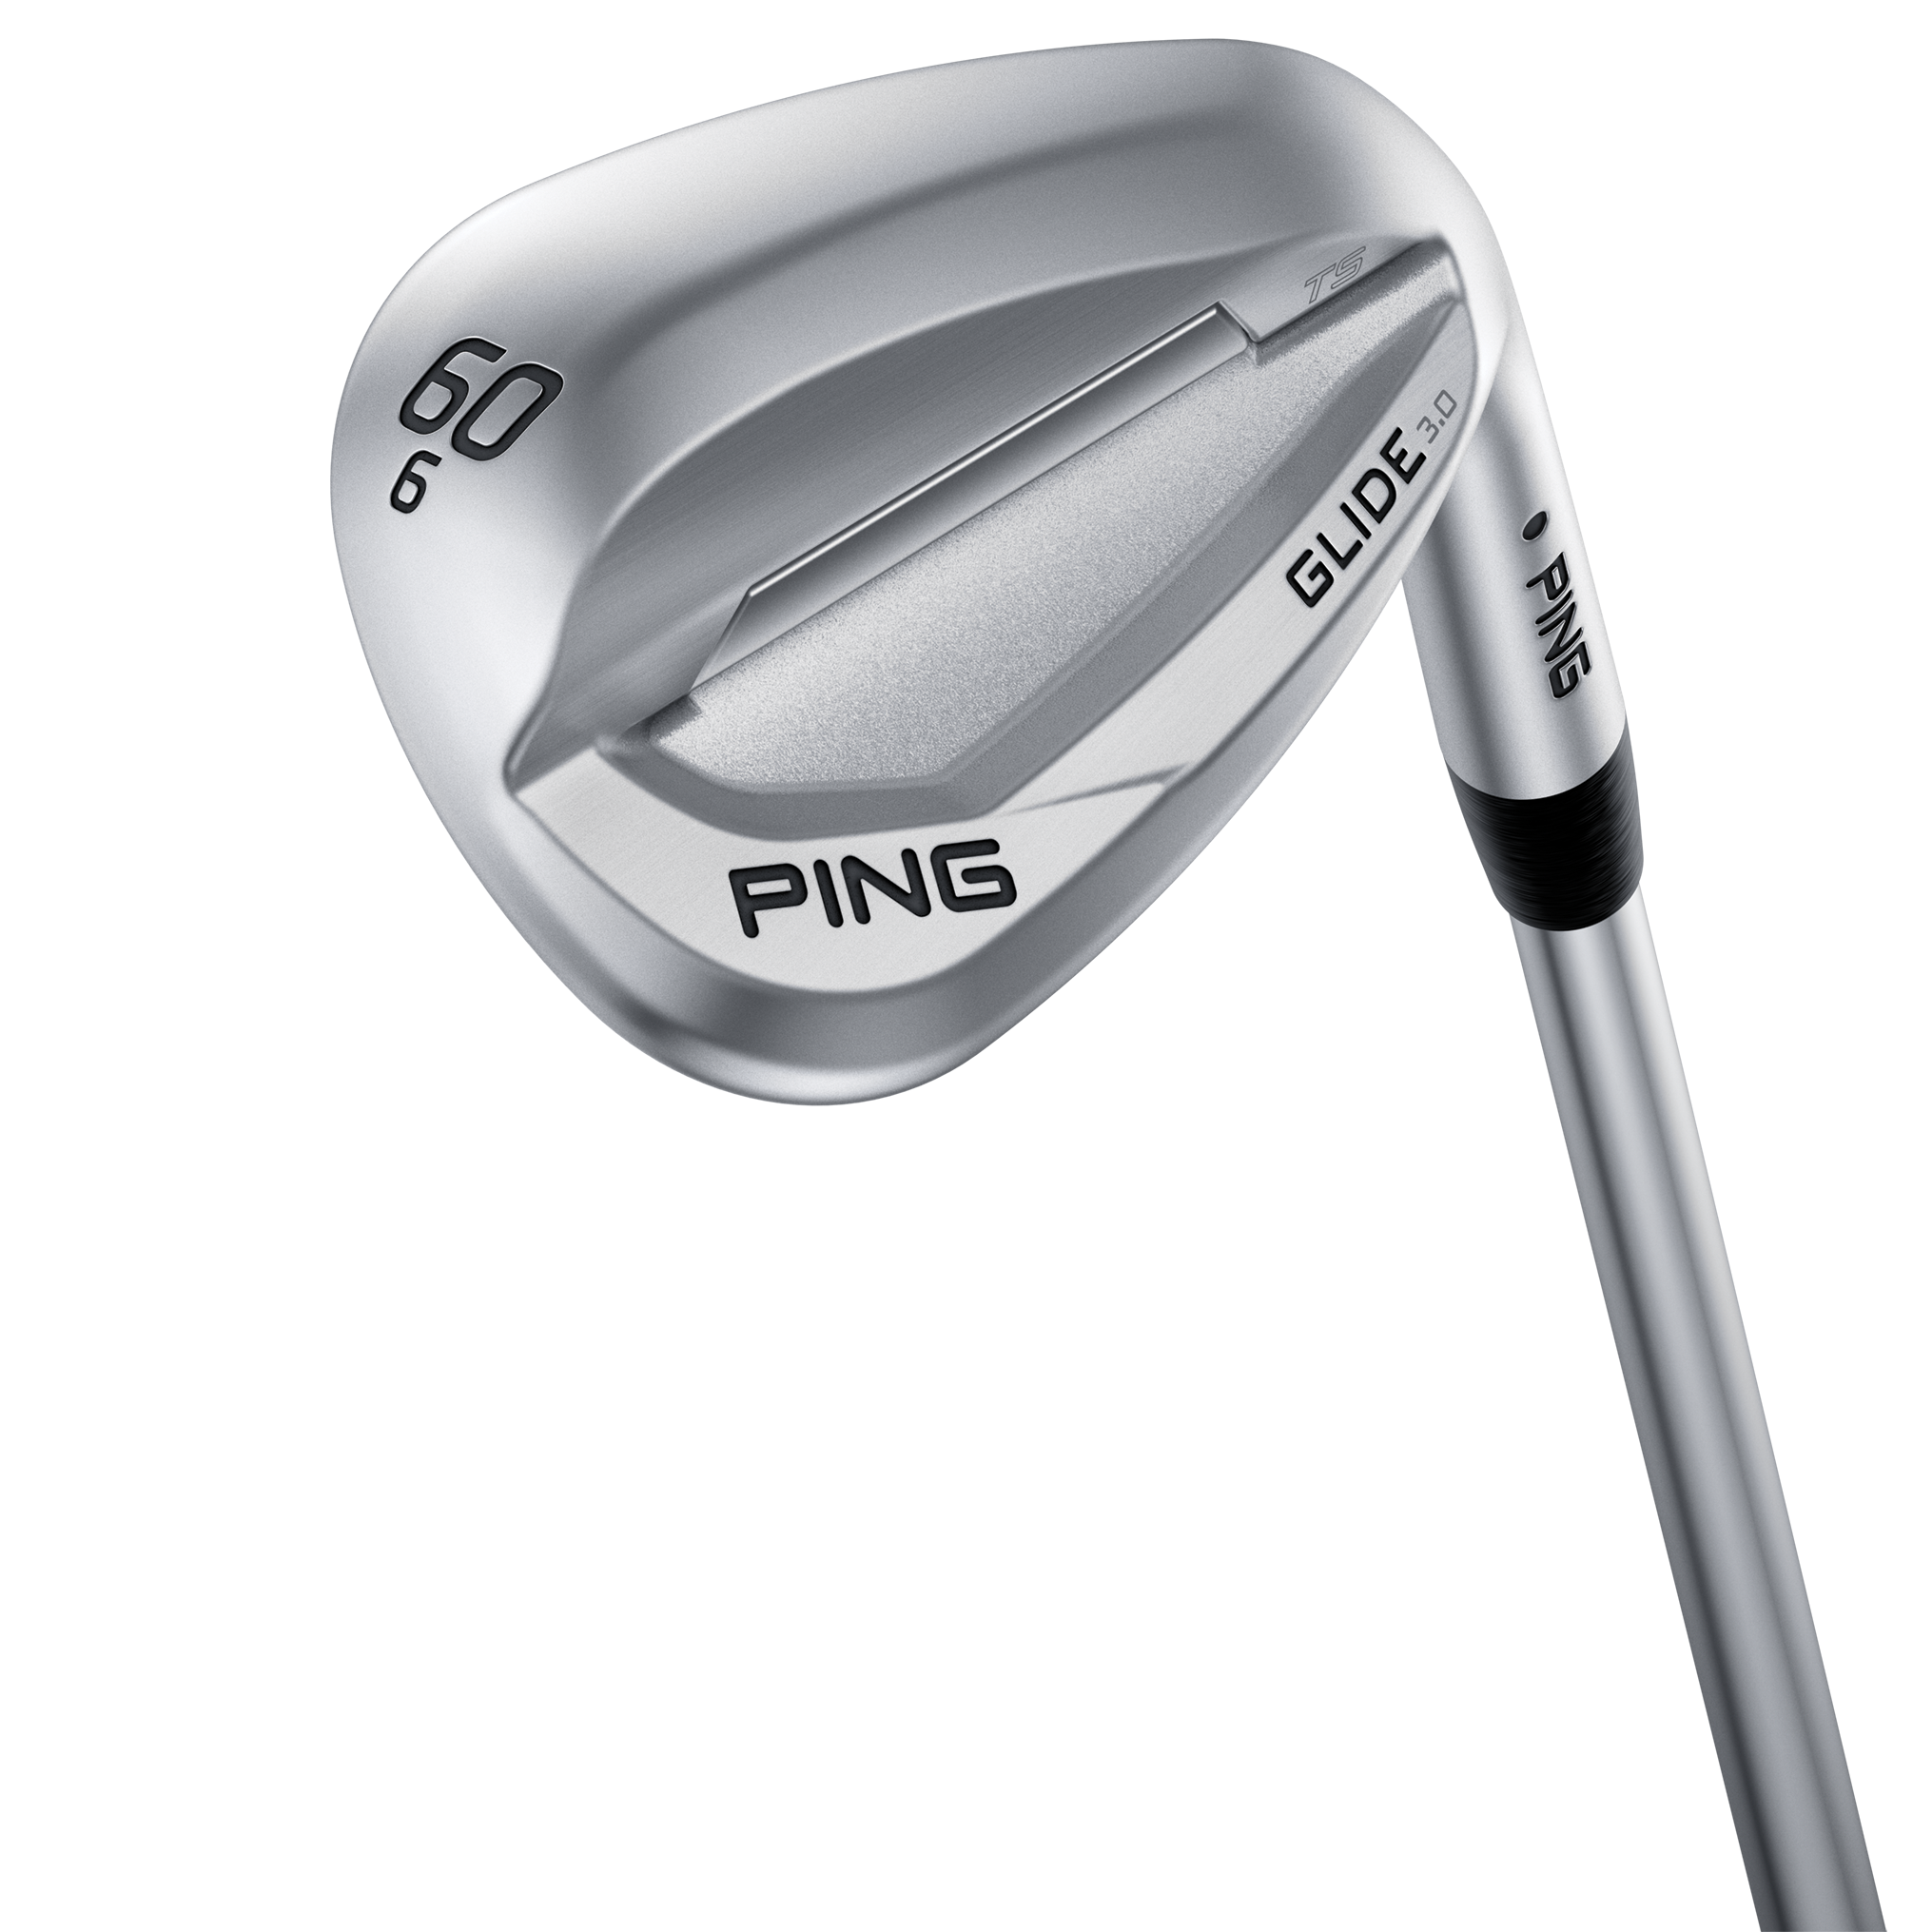 PING Glide 3.0 Wedges - The GOLFTEC Scramble